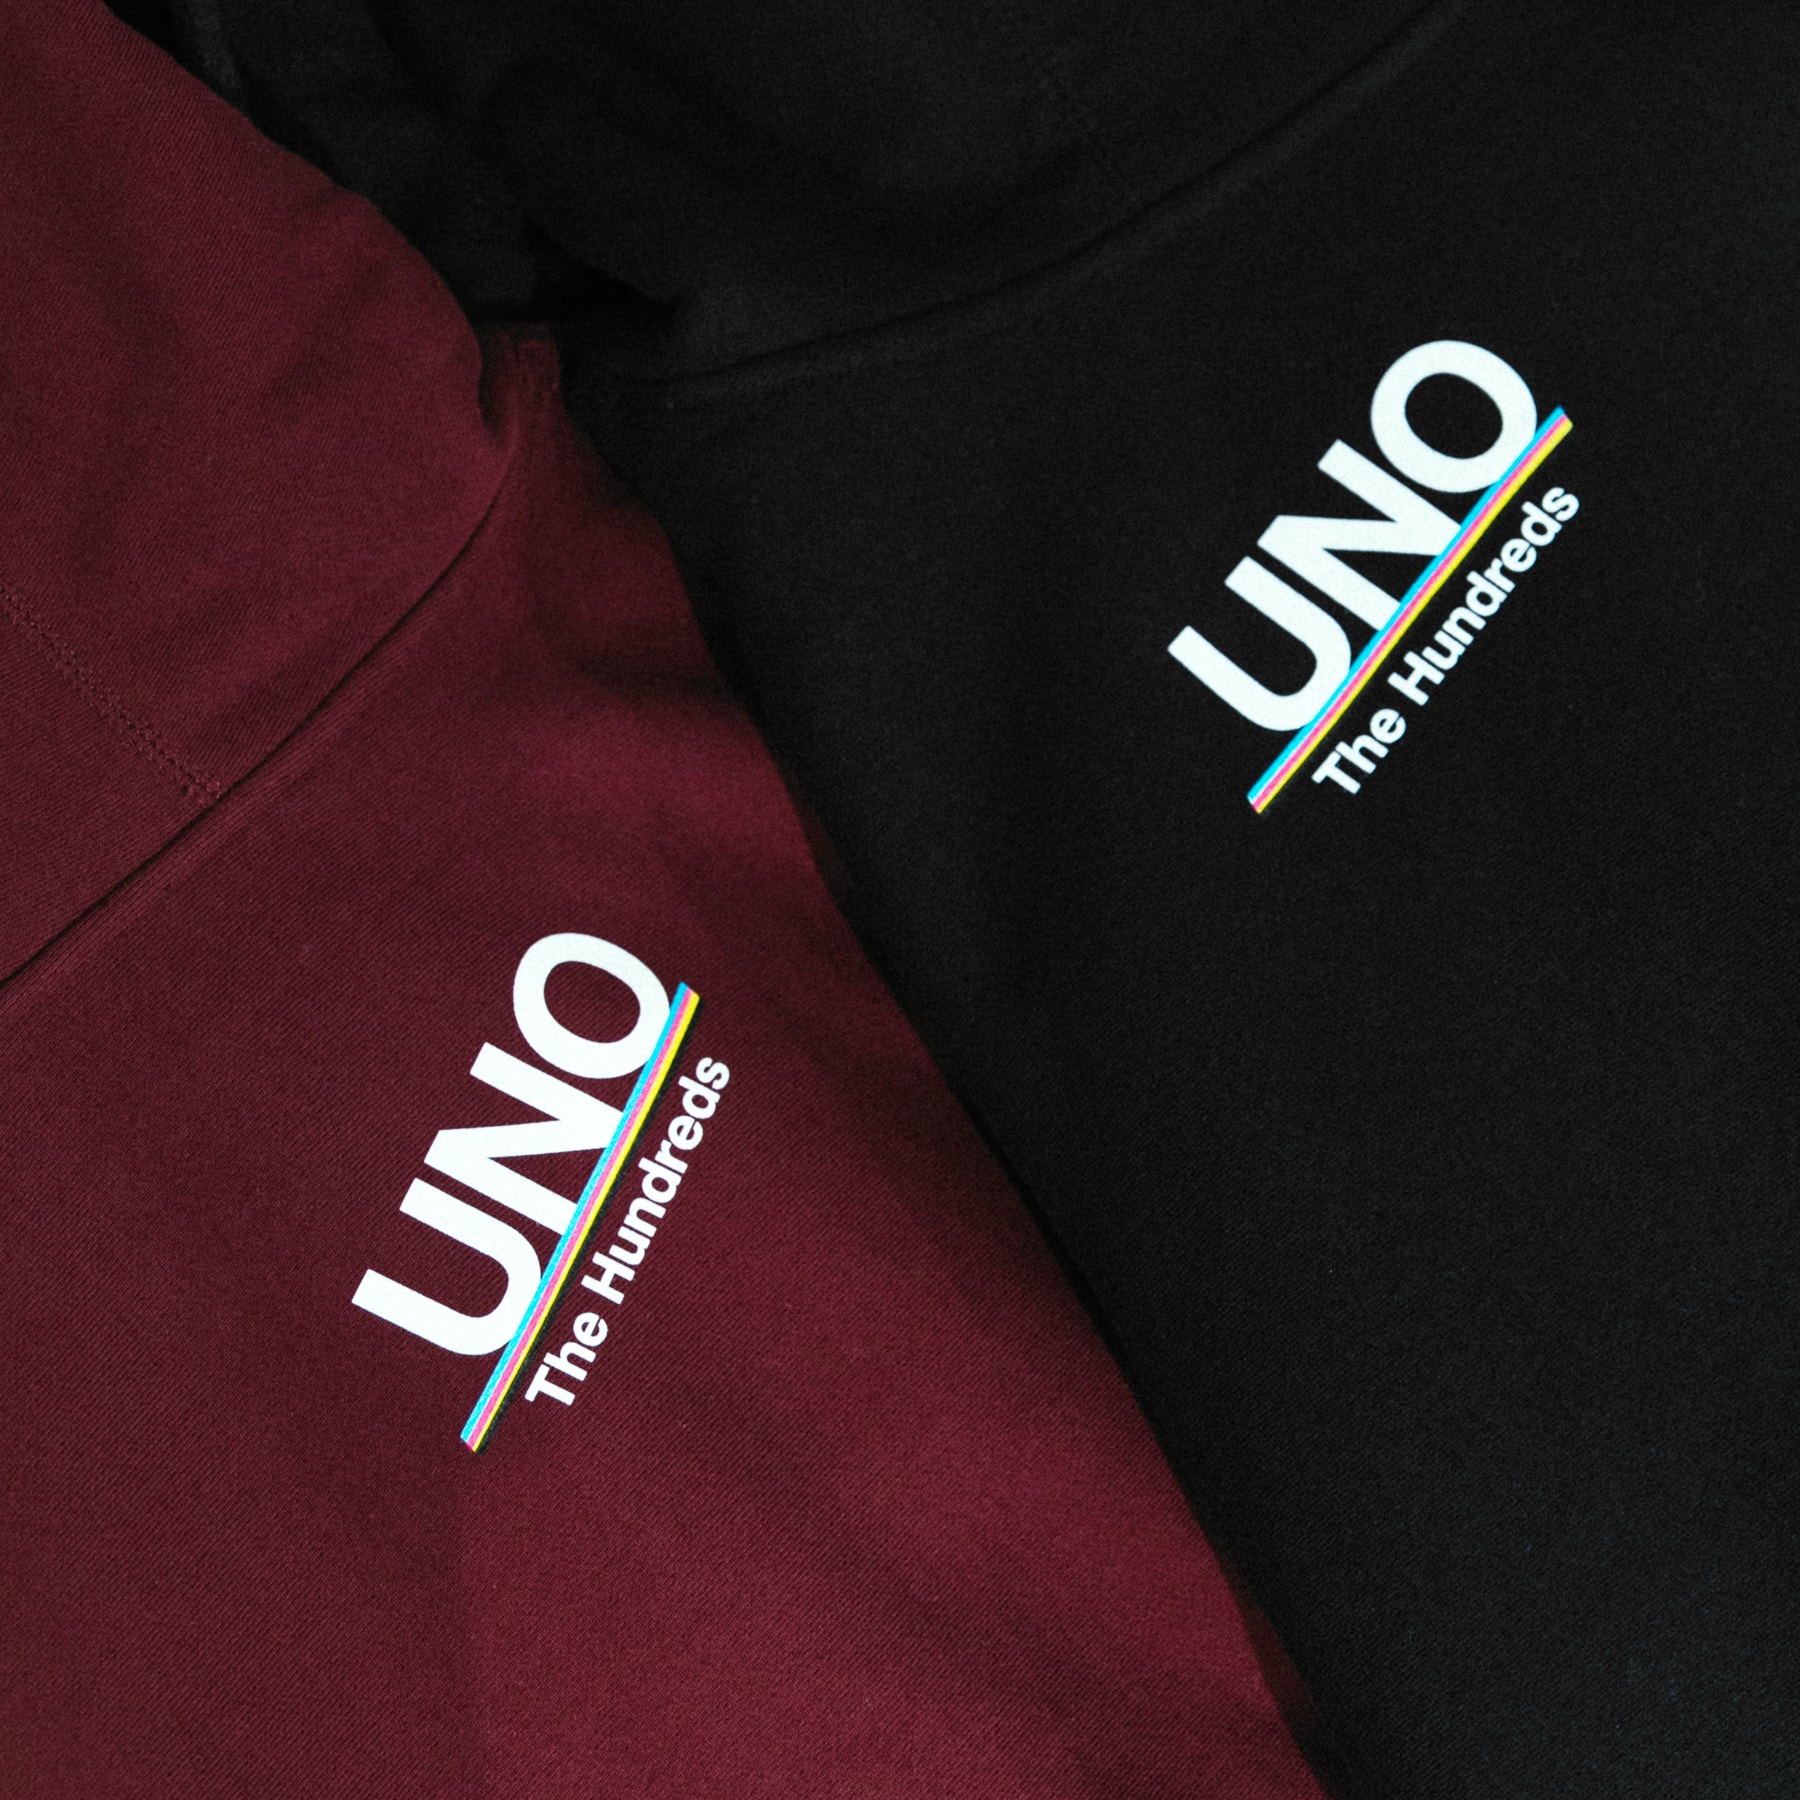 The Hundreds UNO Collaboration Release Date Info